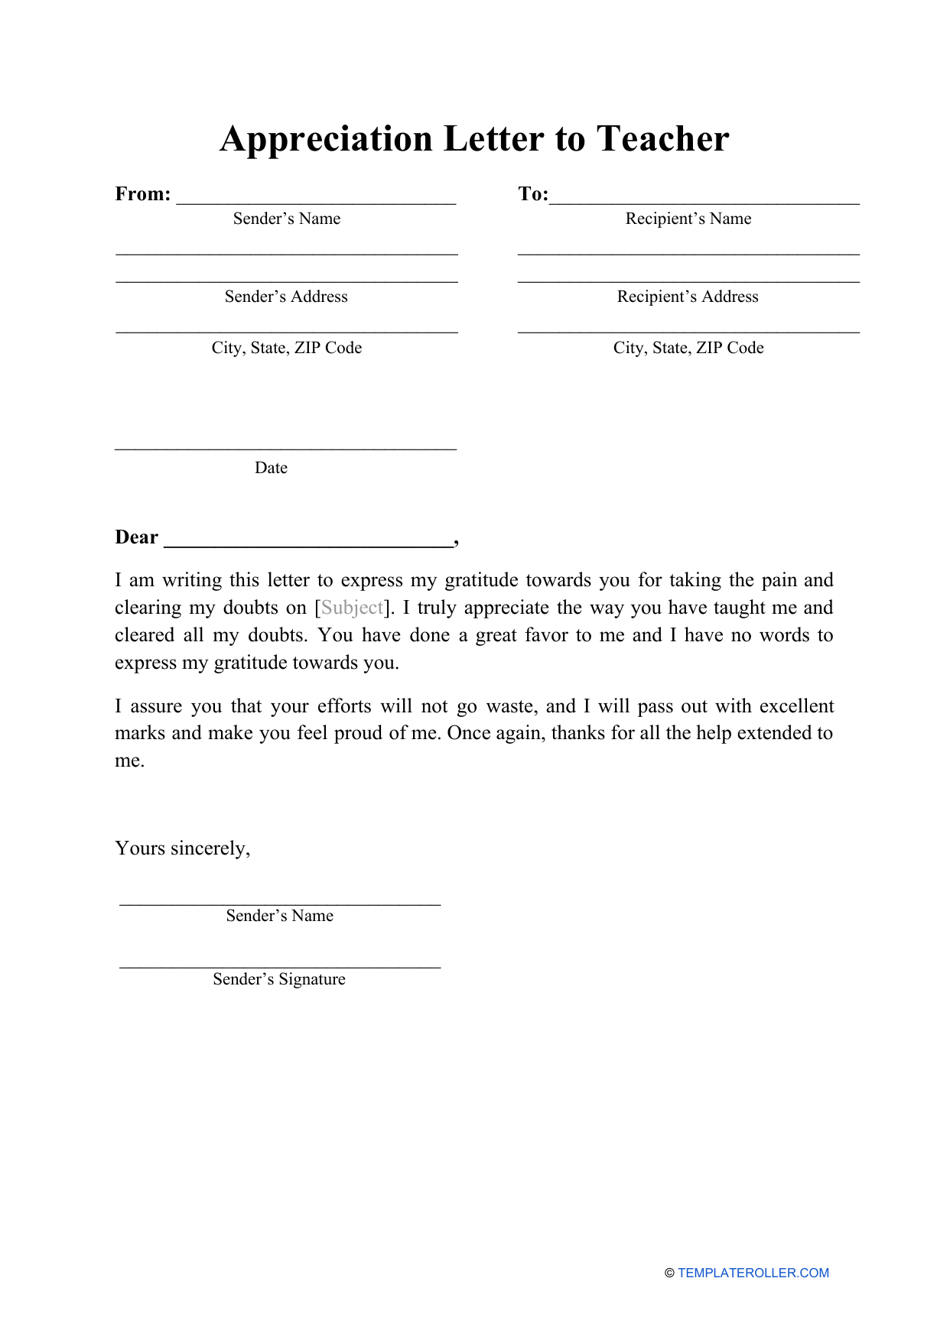 Appreciation letter to teacher template - preview image